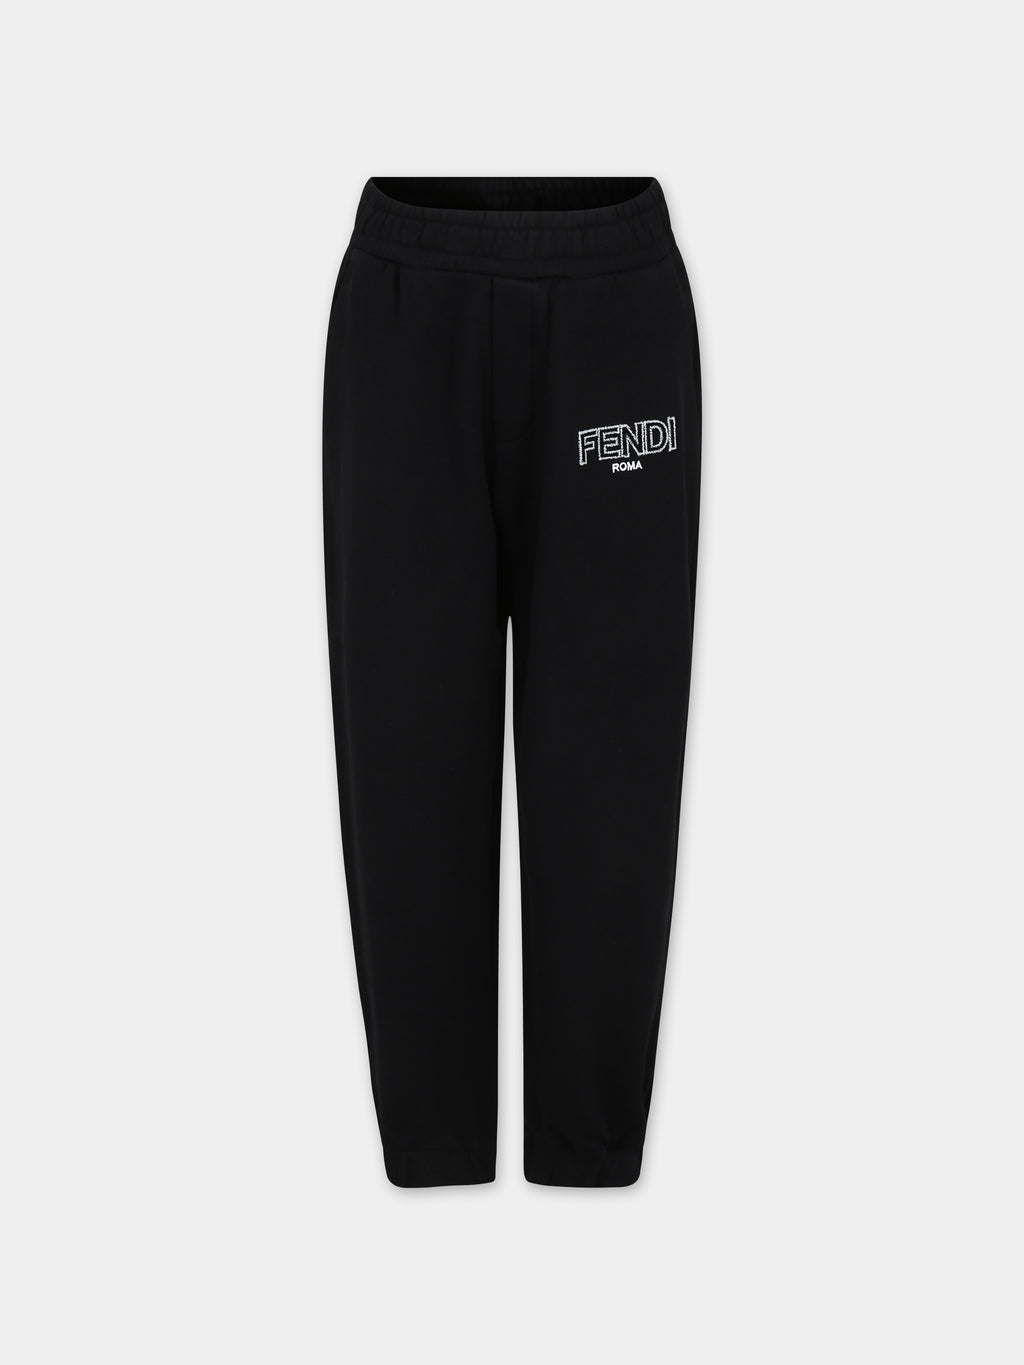 Black trousers for kids with Fendi logo